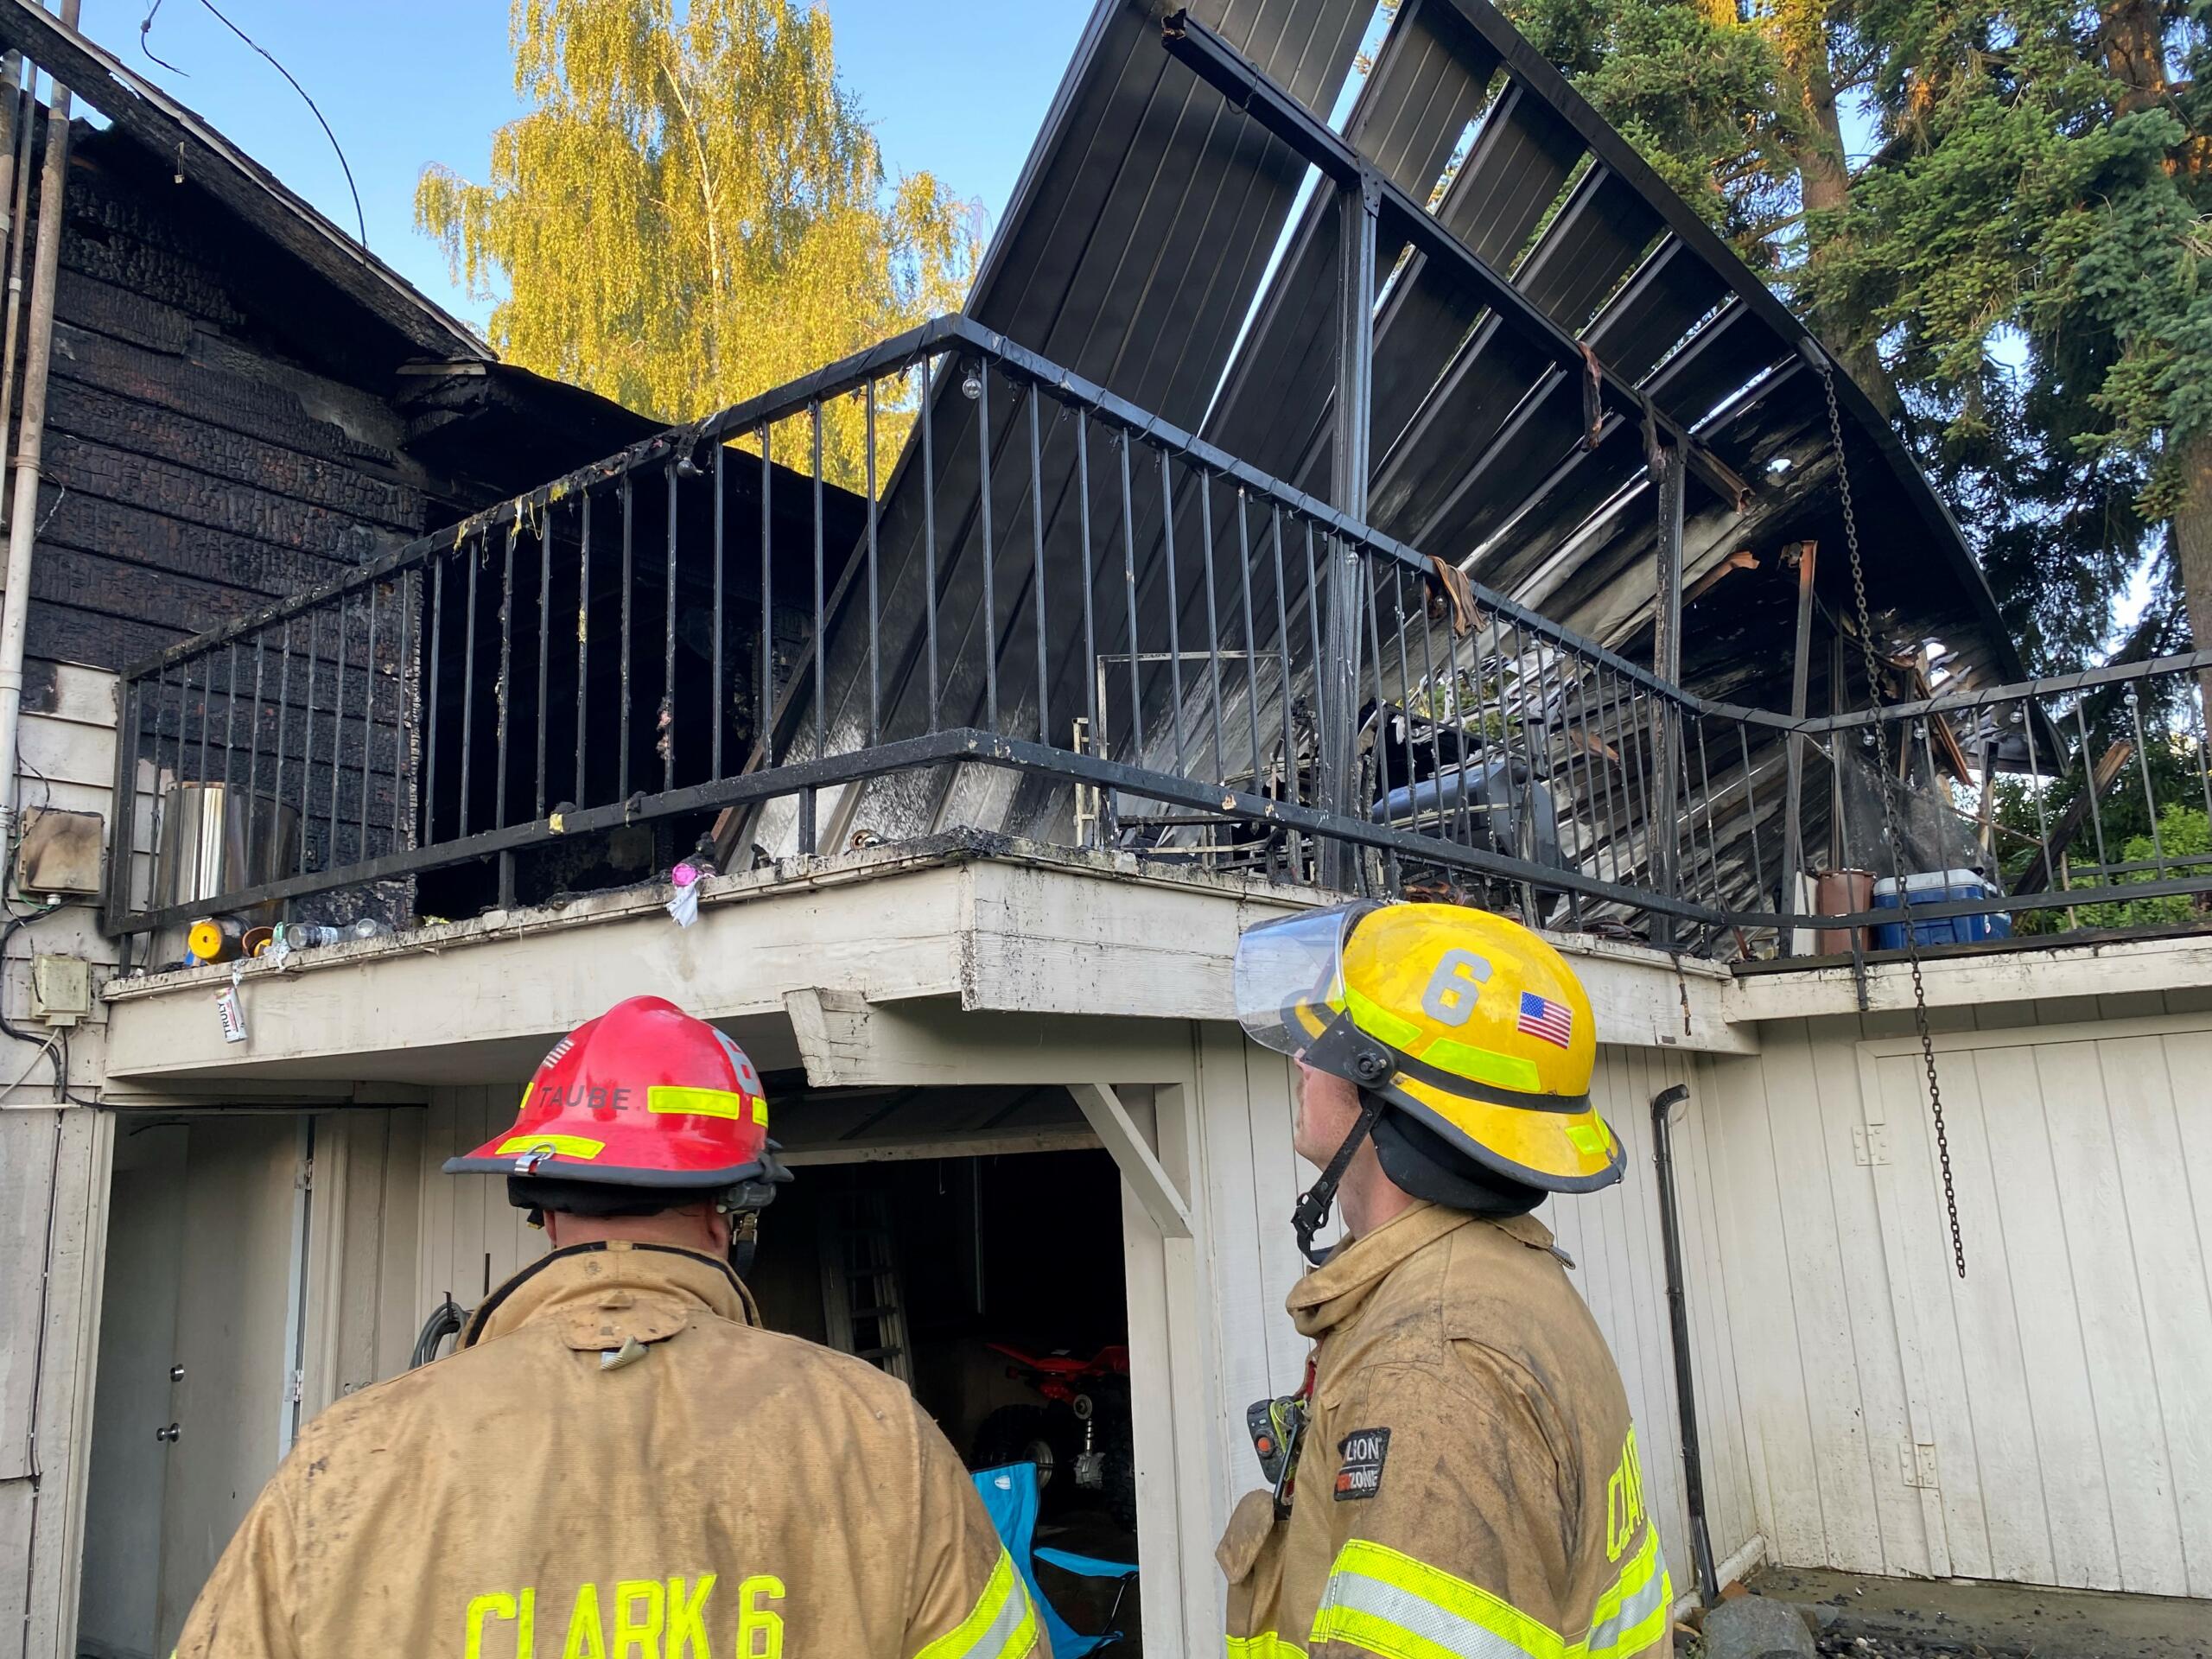 Clark County Fire District 6 responded to a house fire in Hazel Dell early Monday morning. One dog trapped in the house was saved but one died. No other residents of the home were reported injured.